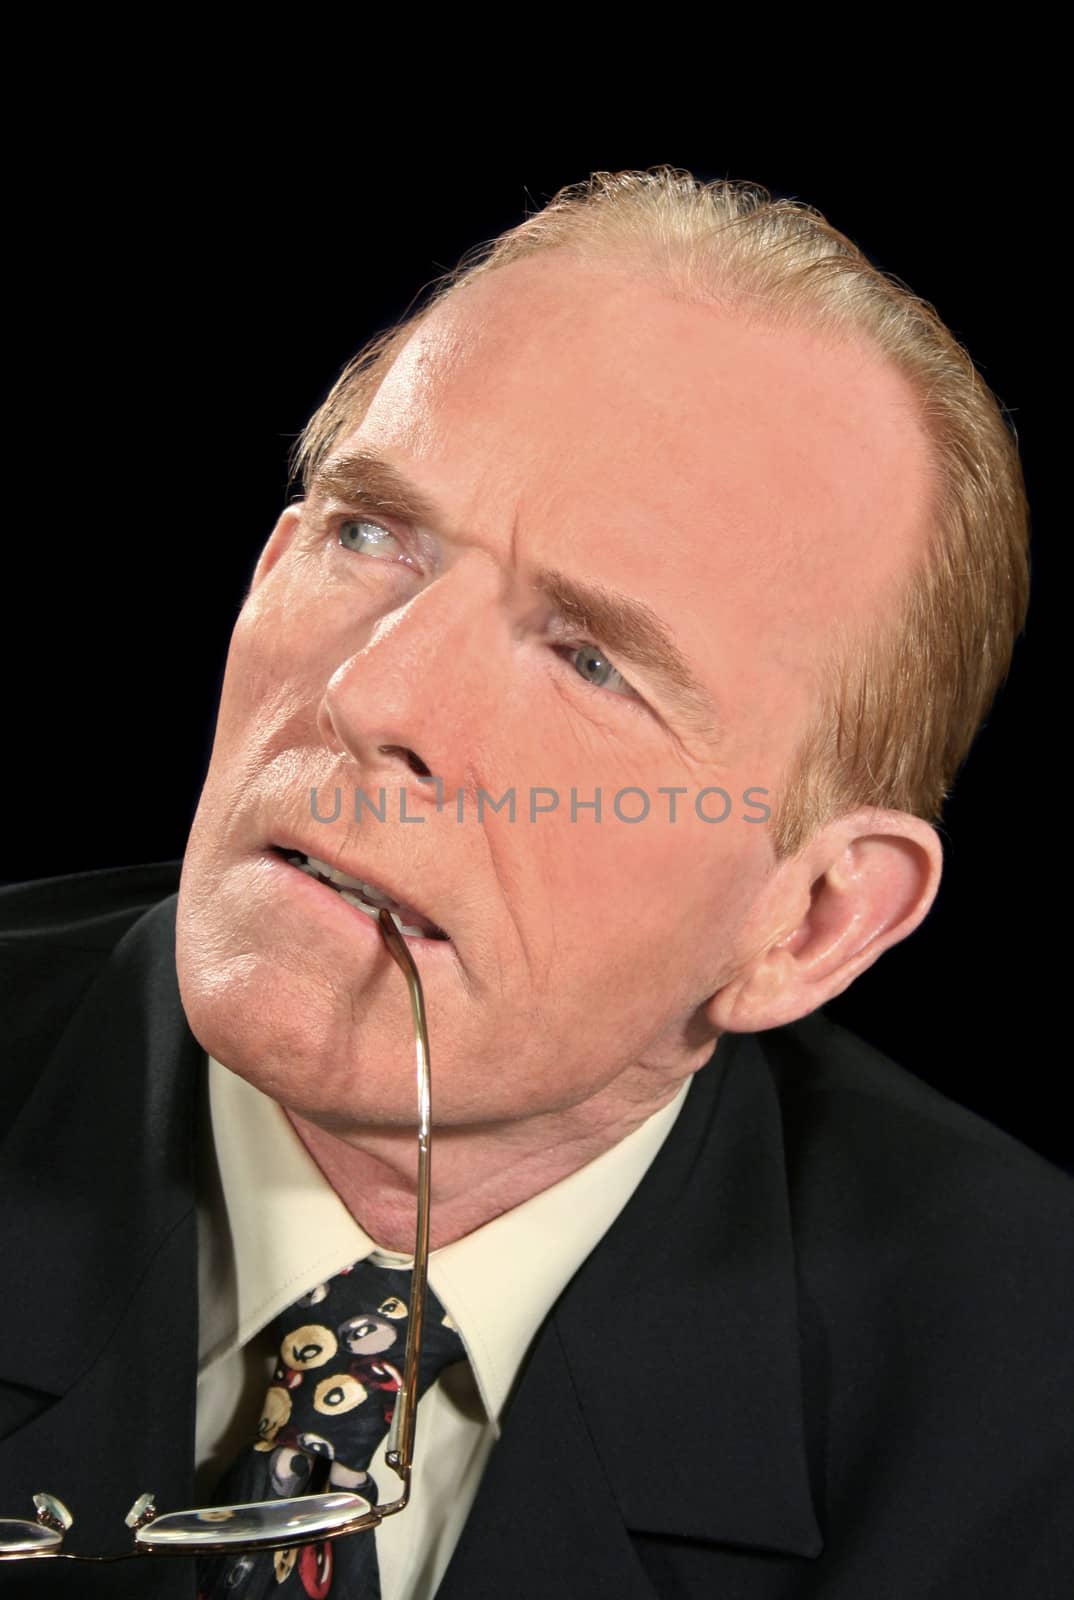 Businessman concentrating and listening intently with glasses.